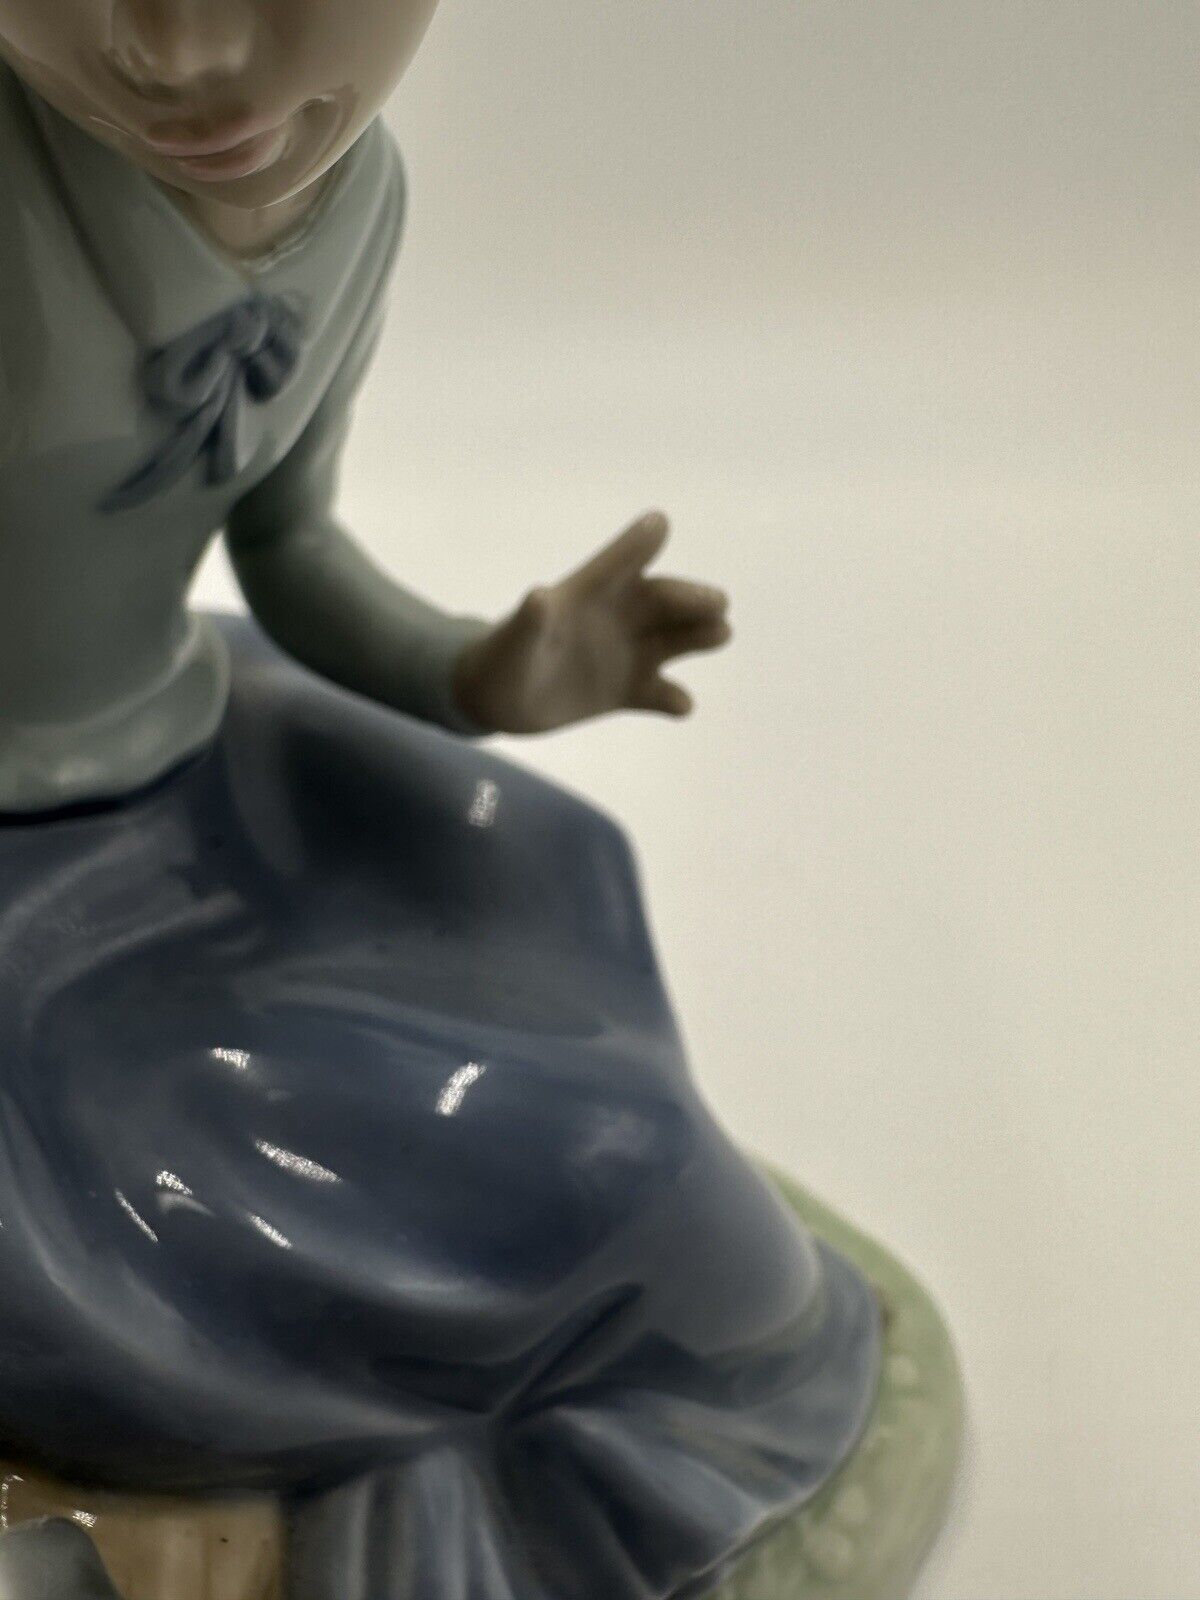 Lladro Nao Stories to Lulu Figurine 01091 Hand Painted Spain Porcelain Sculpture